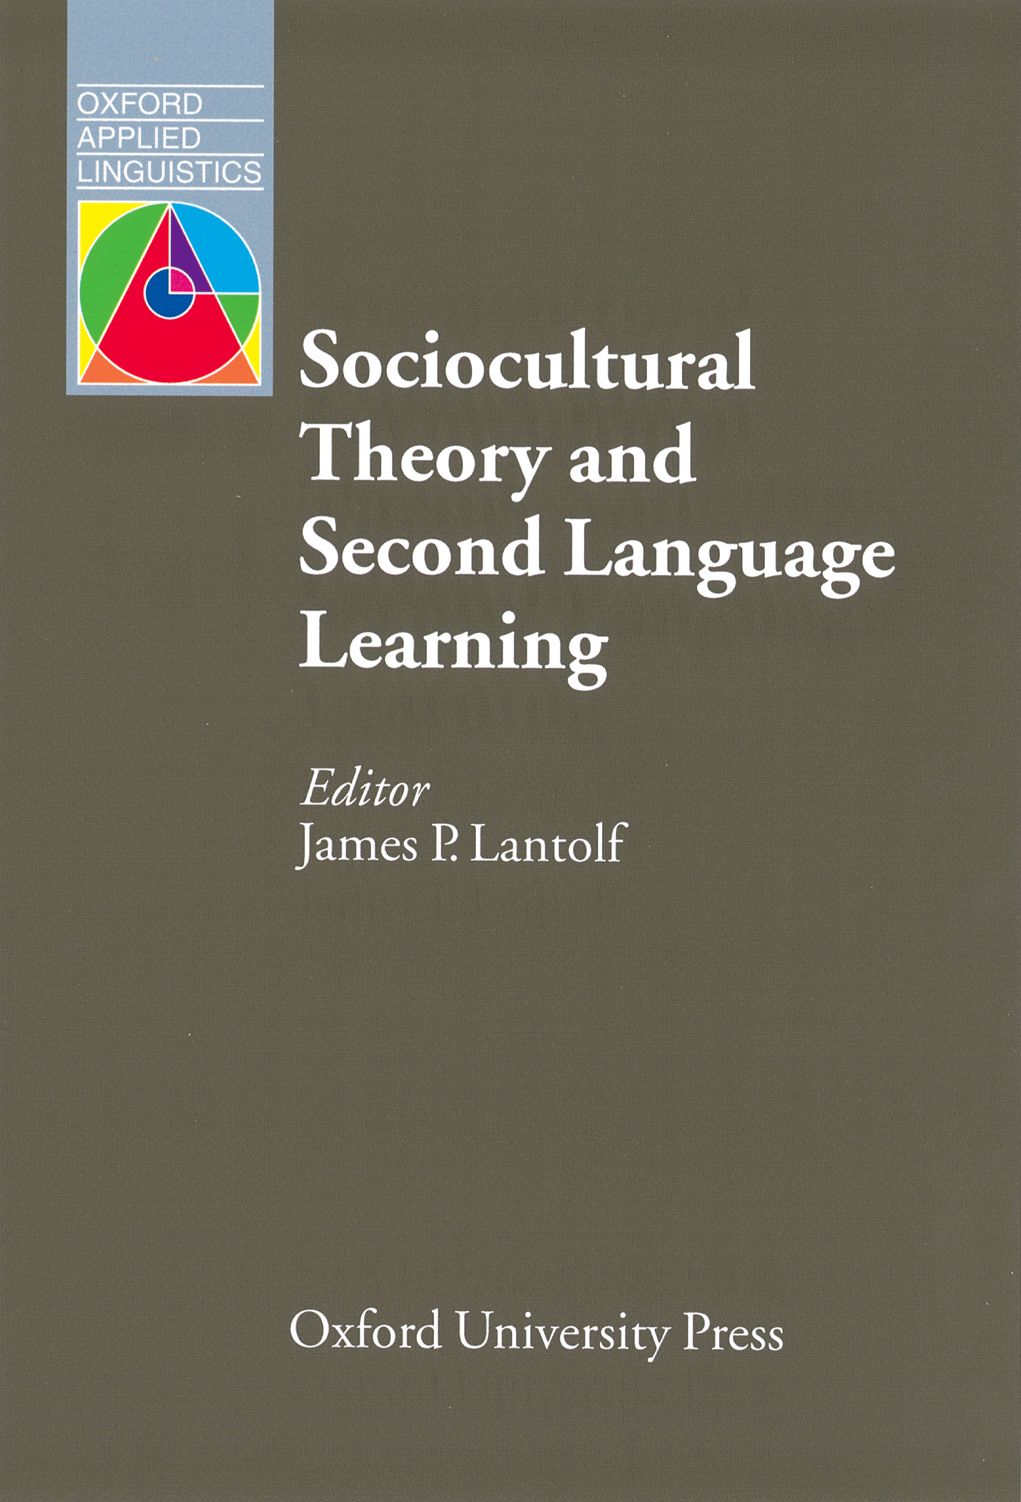 Oxford Applied Linguistics : Sociocultural Theory and Second Language Learning